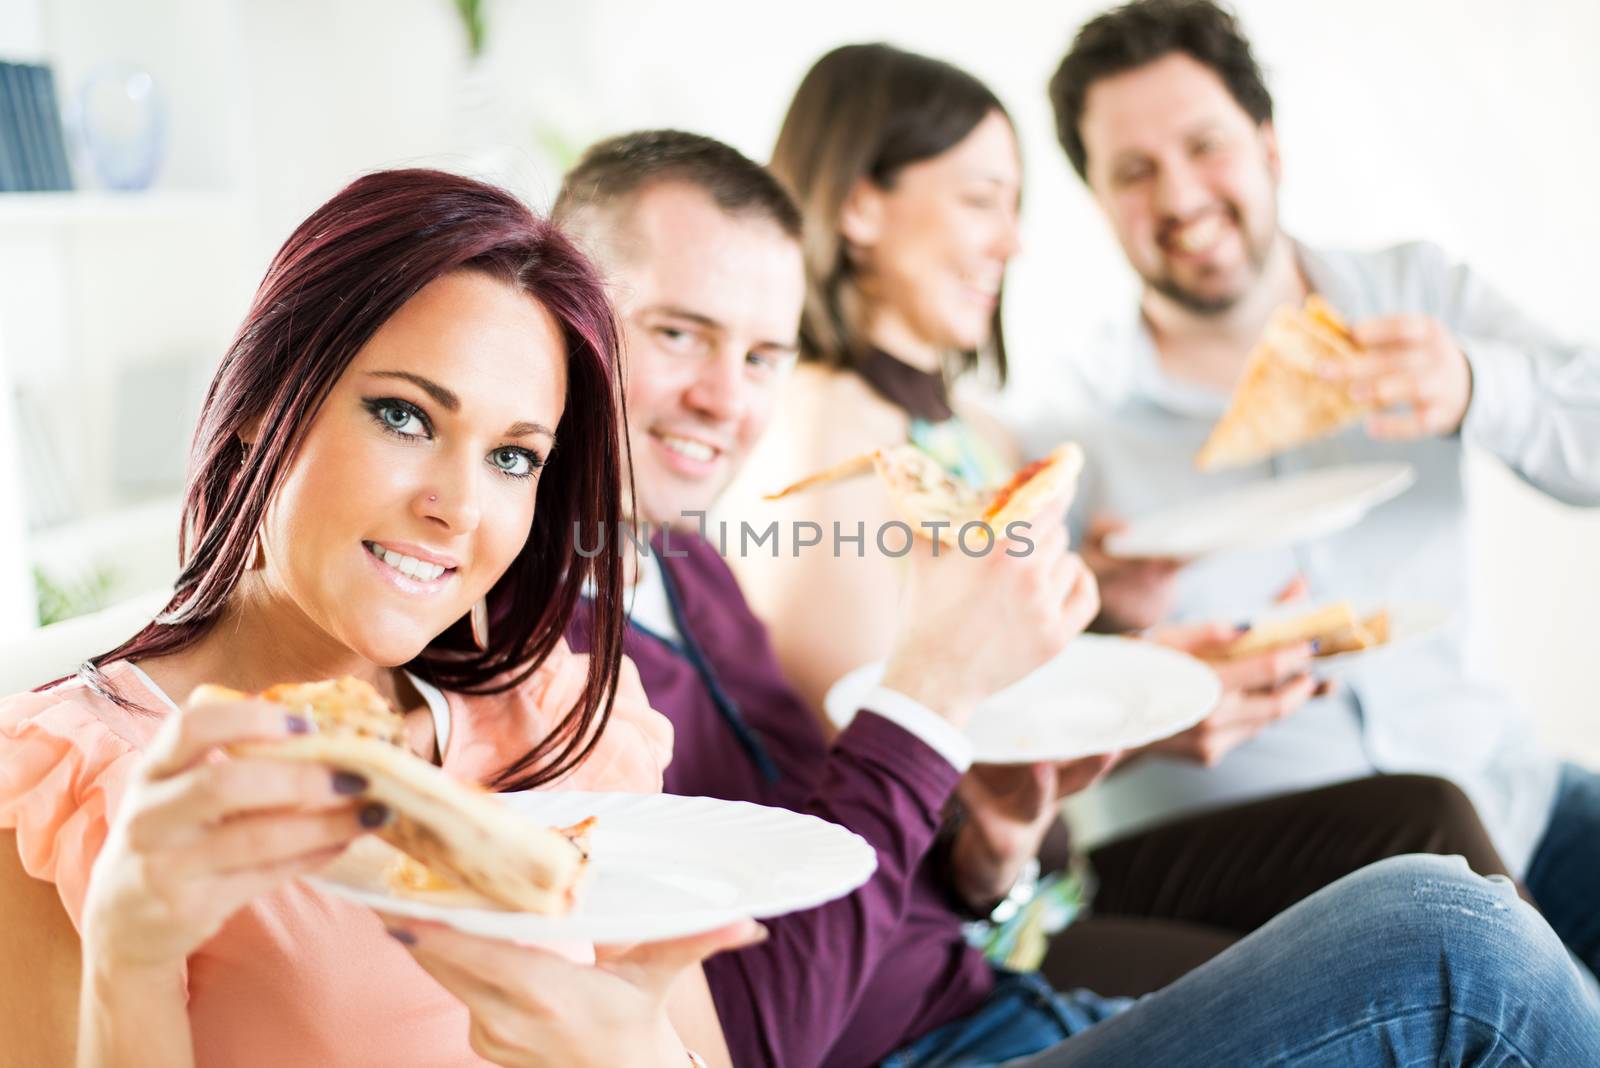 Group of happy friends sitting and eating pizza at Home Interior.